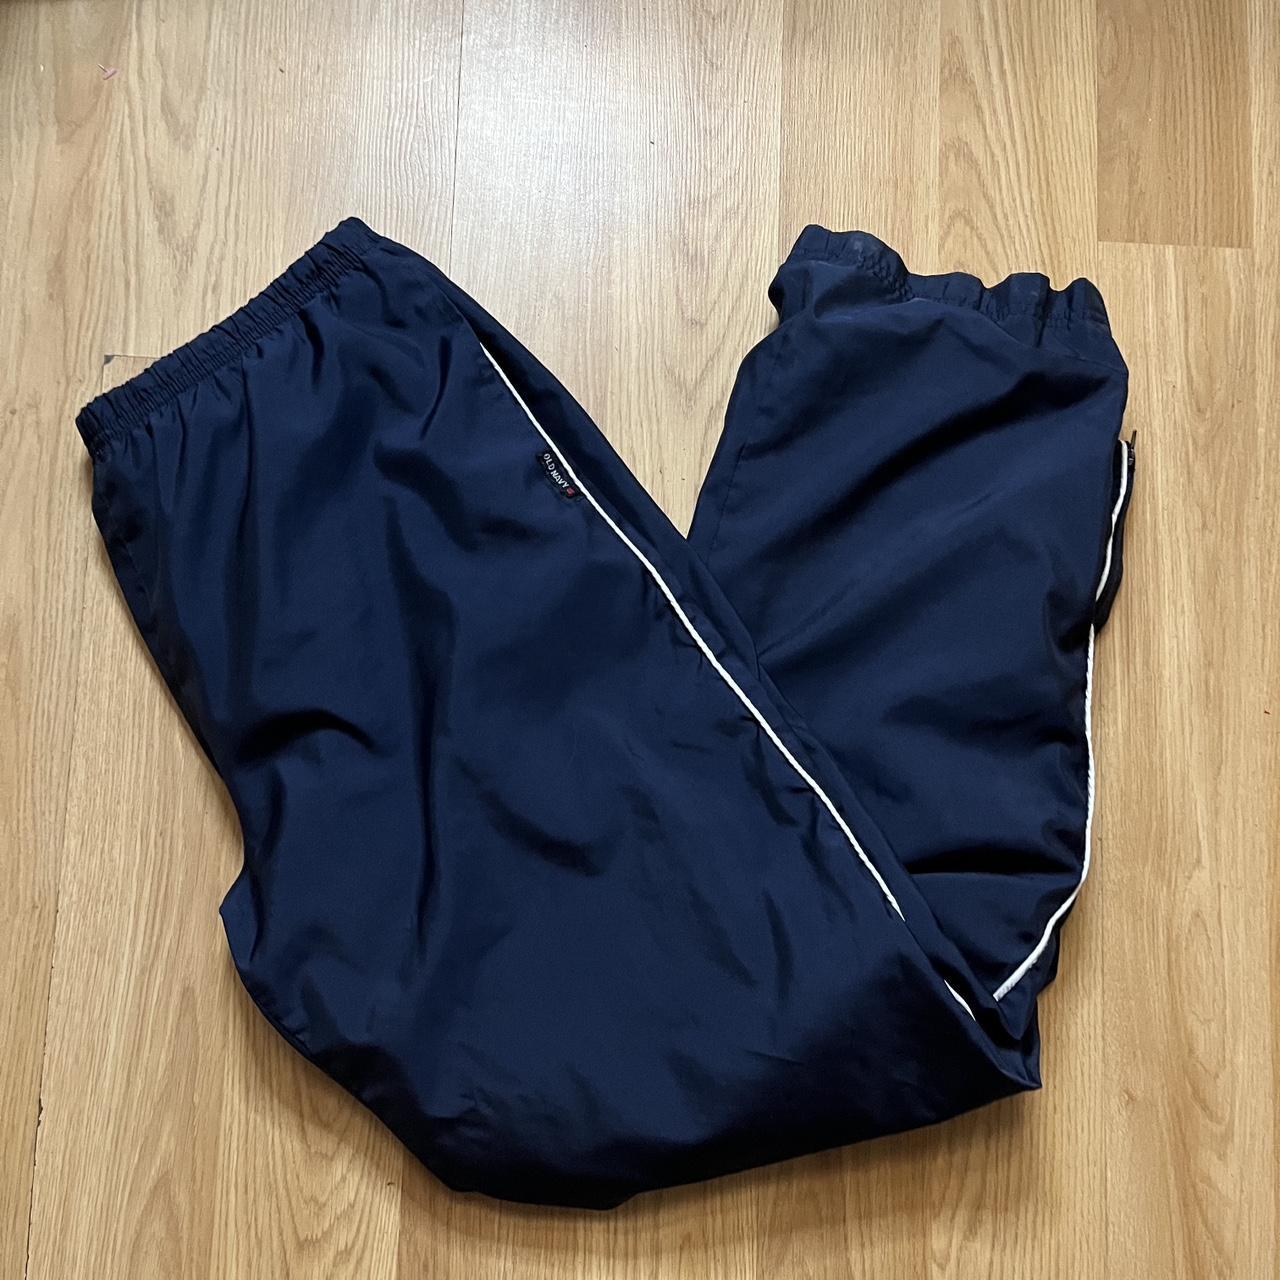 Old Navy Men's White and Navy Joggers-tracksuits